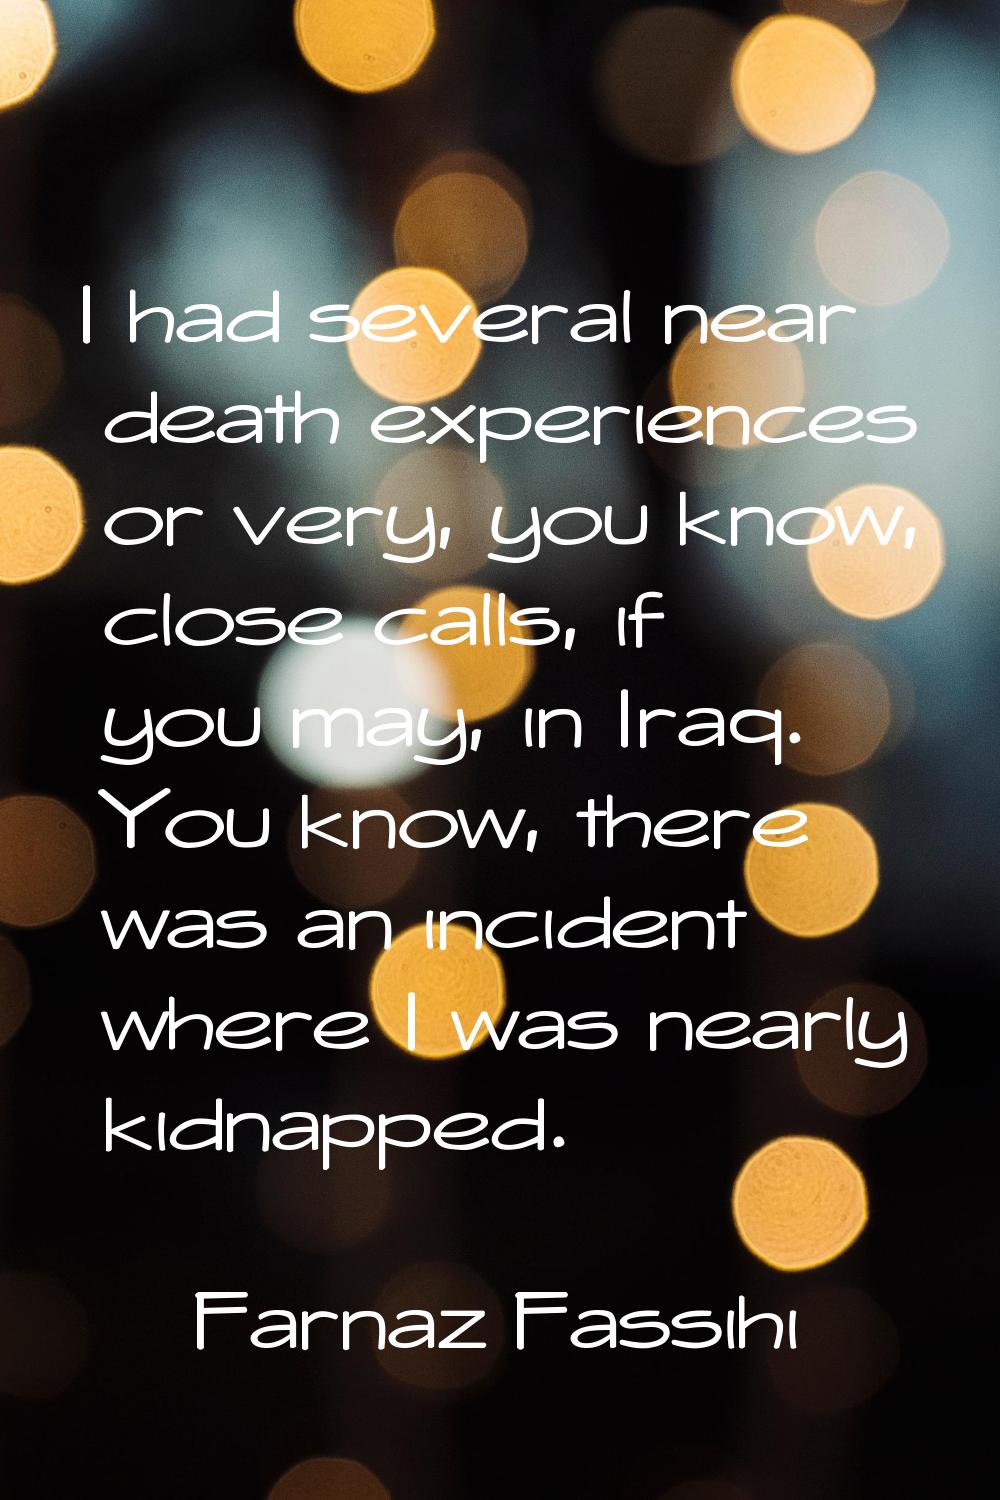 I had several near death experiences or very, you know, close calls, if you may, in Iraq. You know,